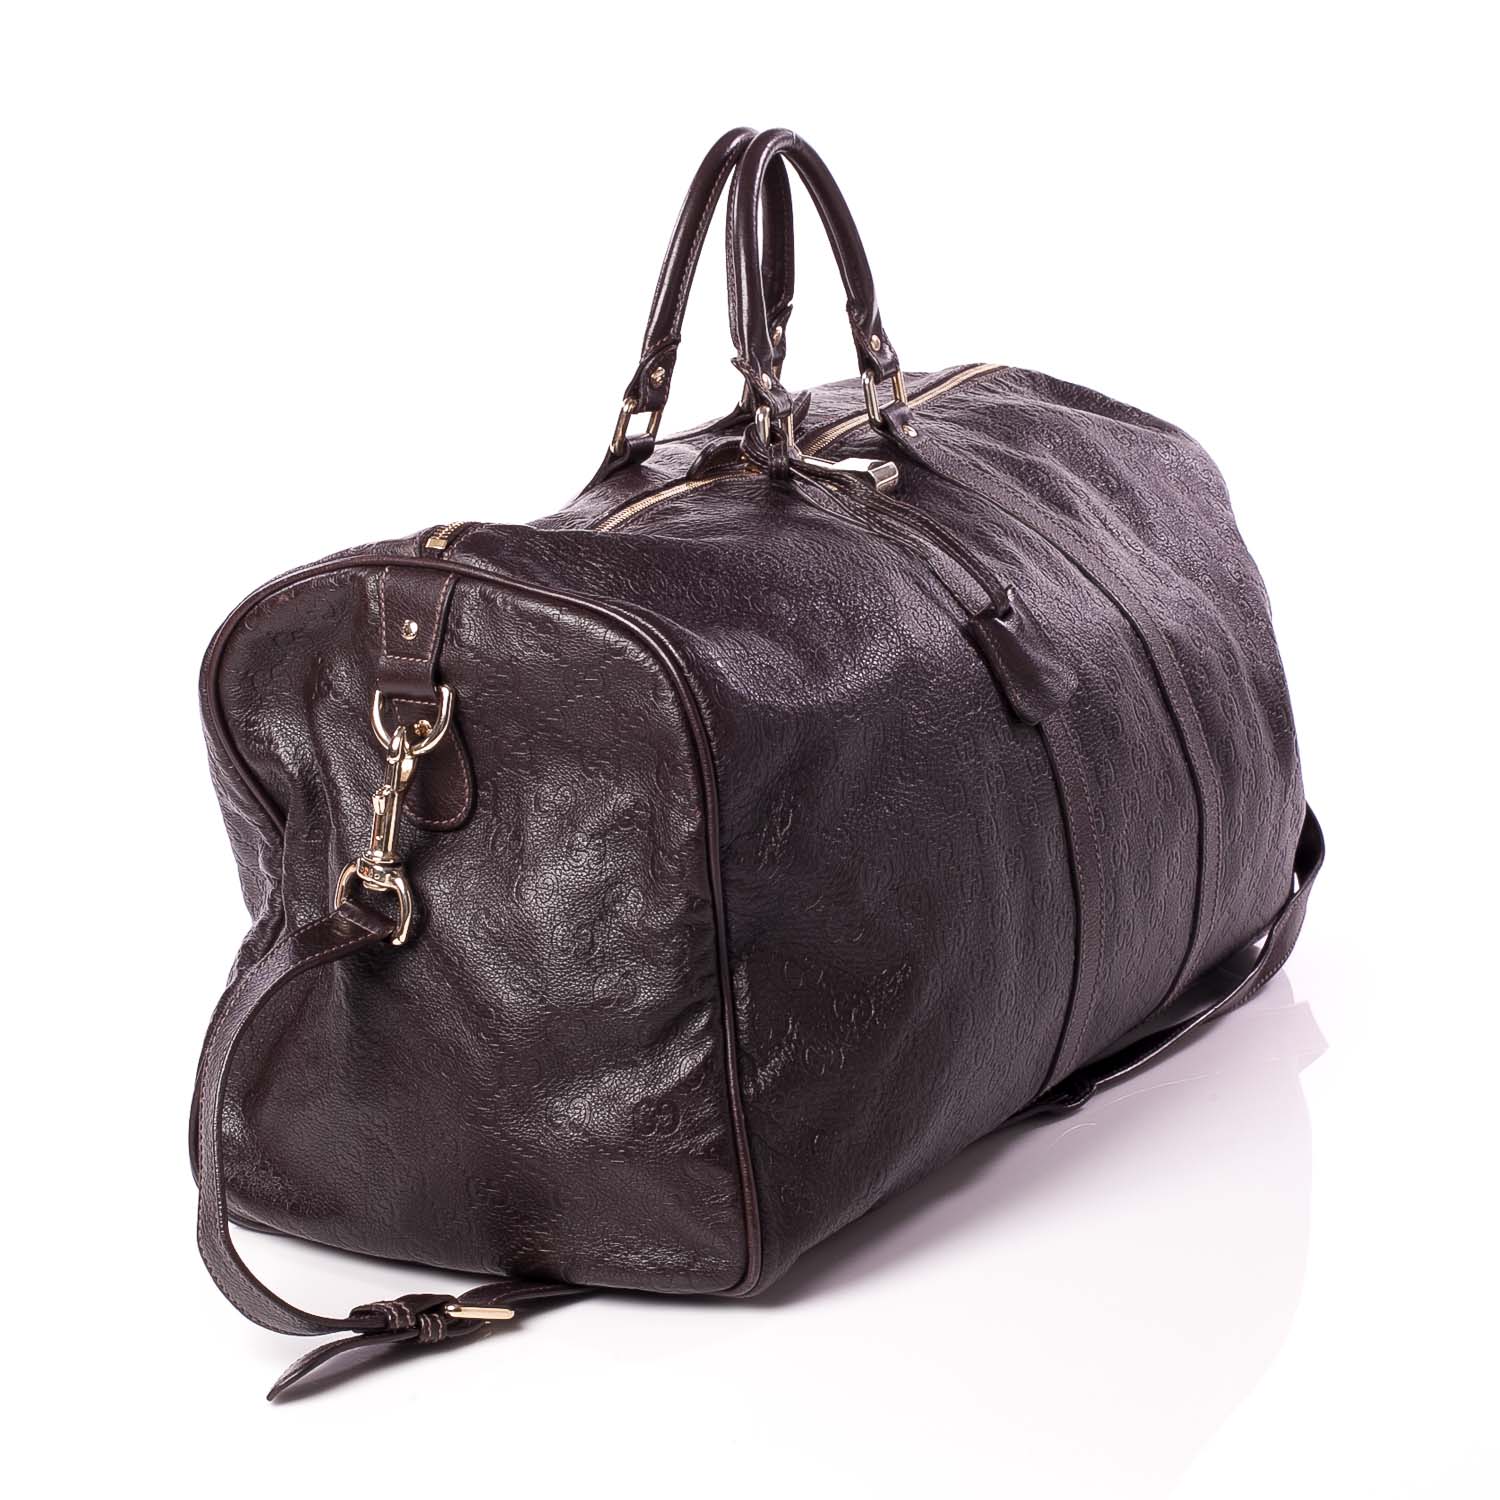 GUCCI Guccissima Large Carry On Duffel Bag Dark Brown 38623